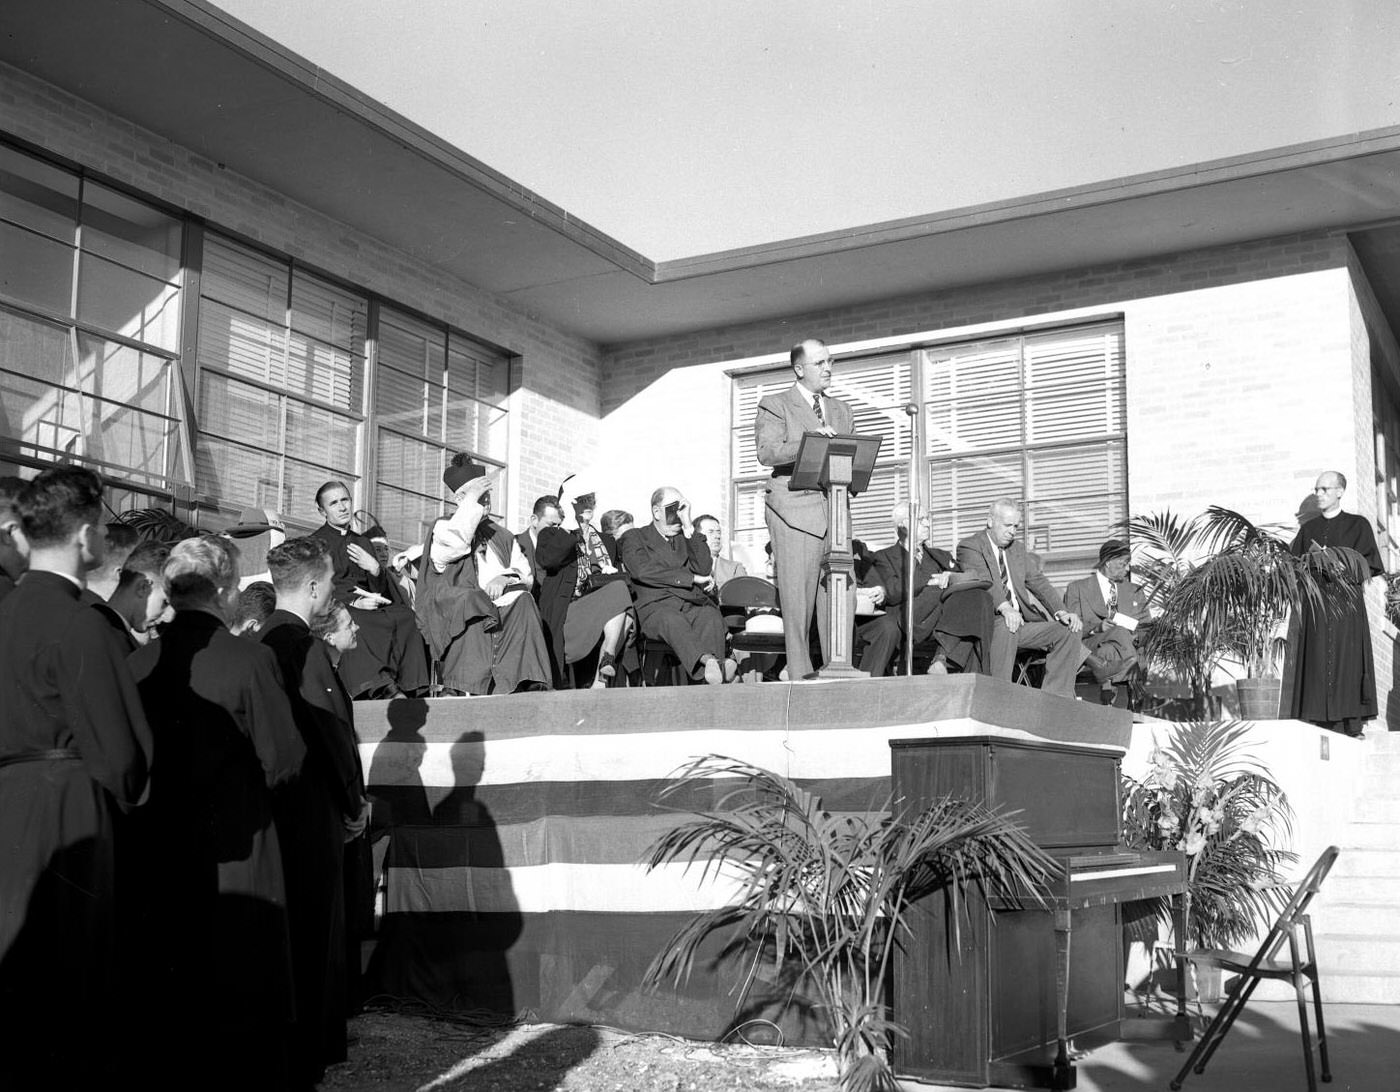 Holy Cross Hospital Dedication with Speaker and Crowd, 1951.